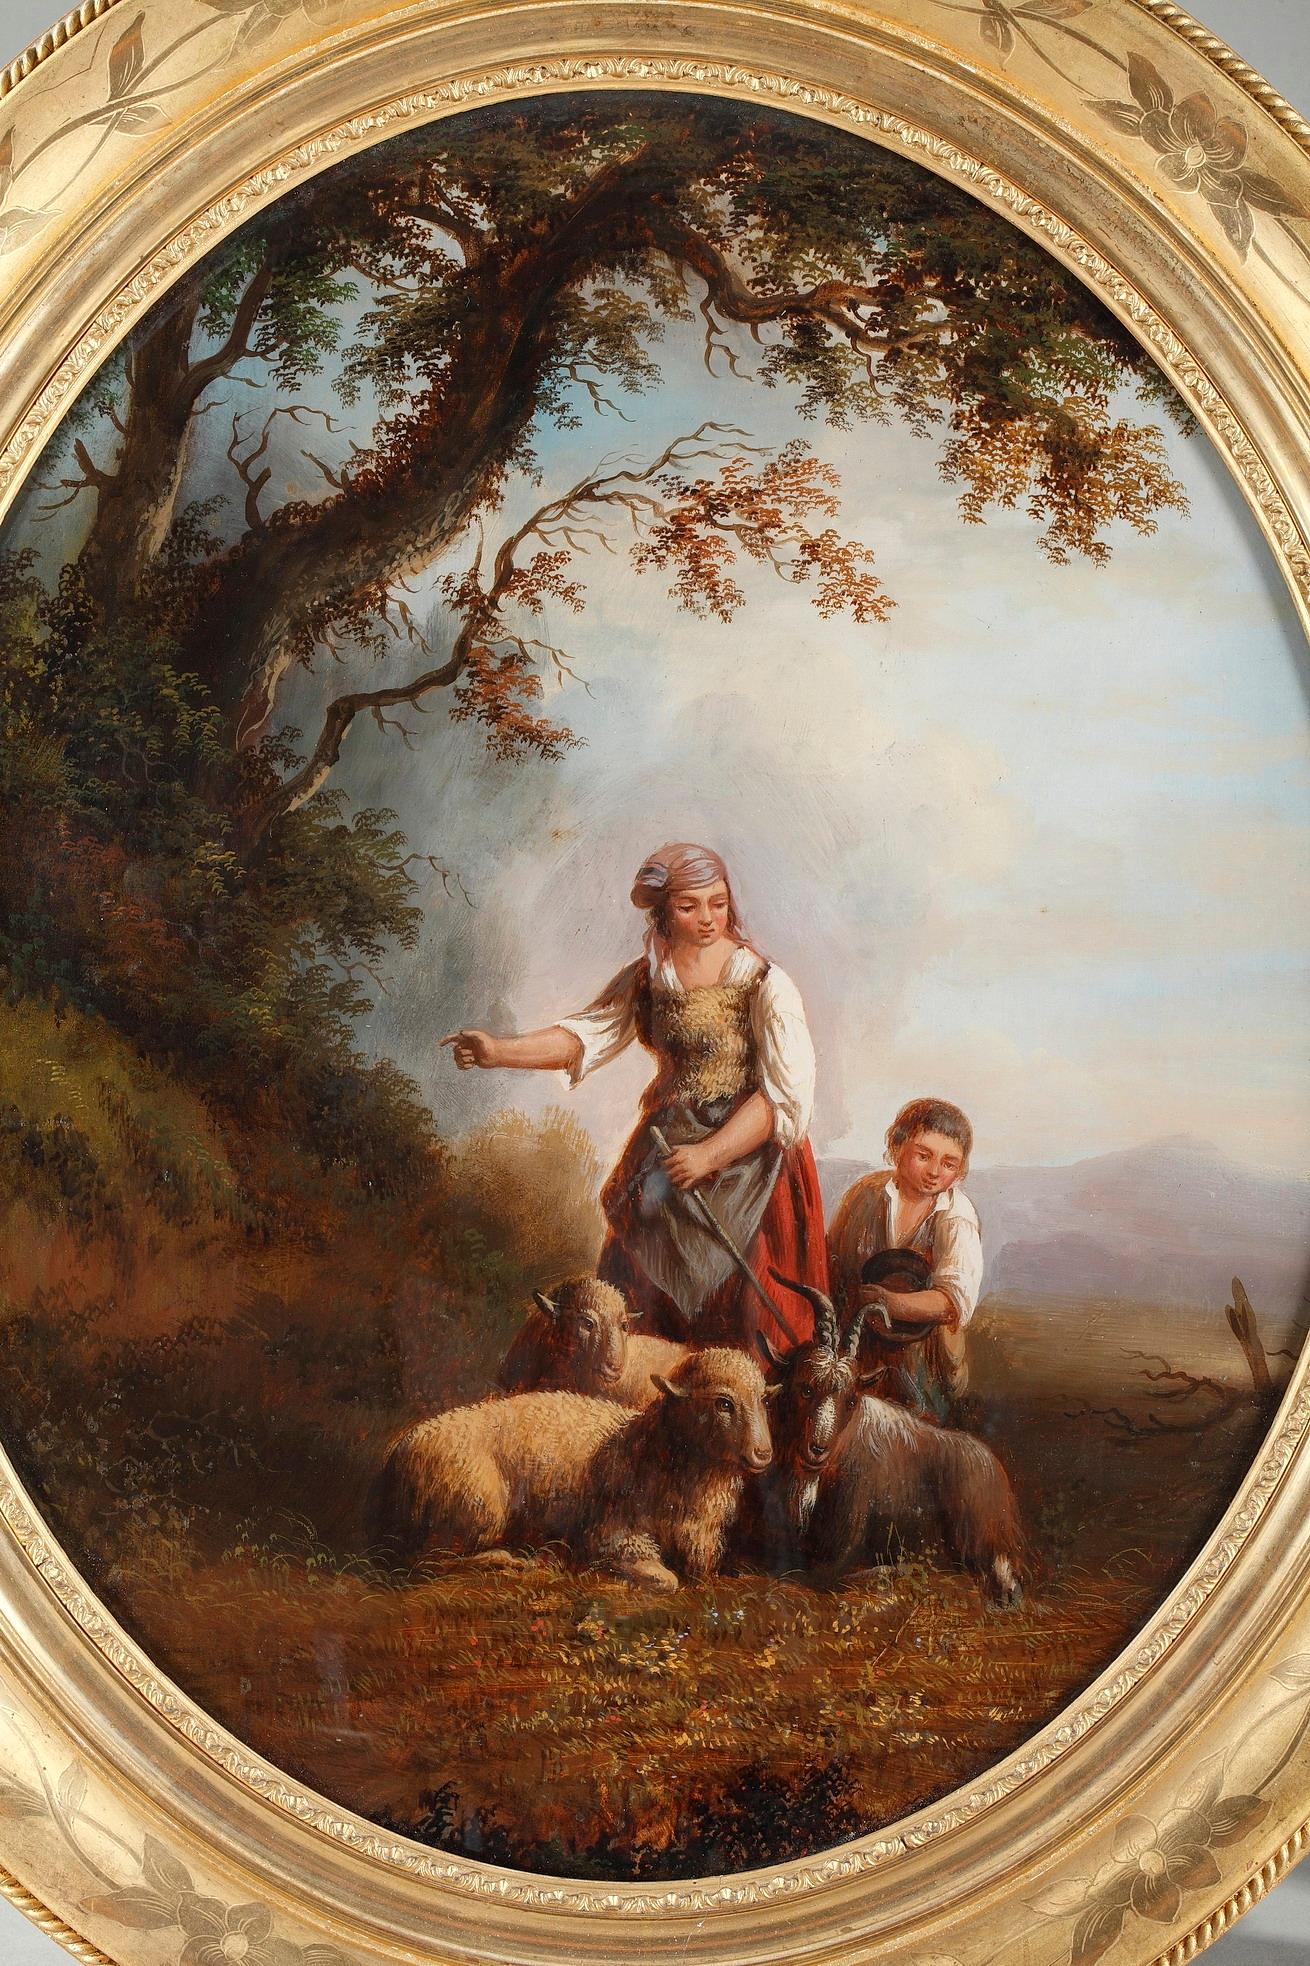 Antique oval reverse glass painting featuring a shepherd and a shepherdess with their sheep, in a landscape. The details are extremely precise. Original giltwood frame decorated with floral motives. Signed Xerey.

High without frame: